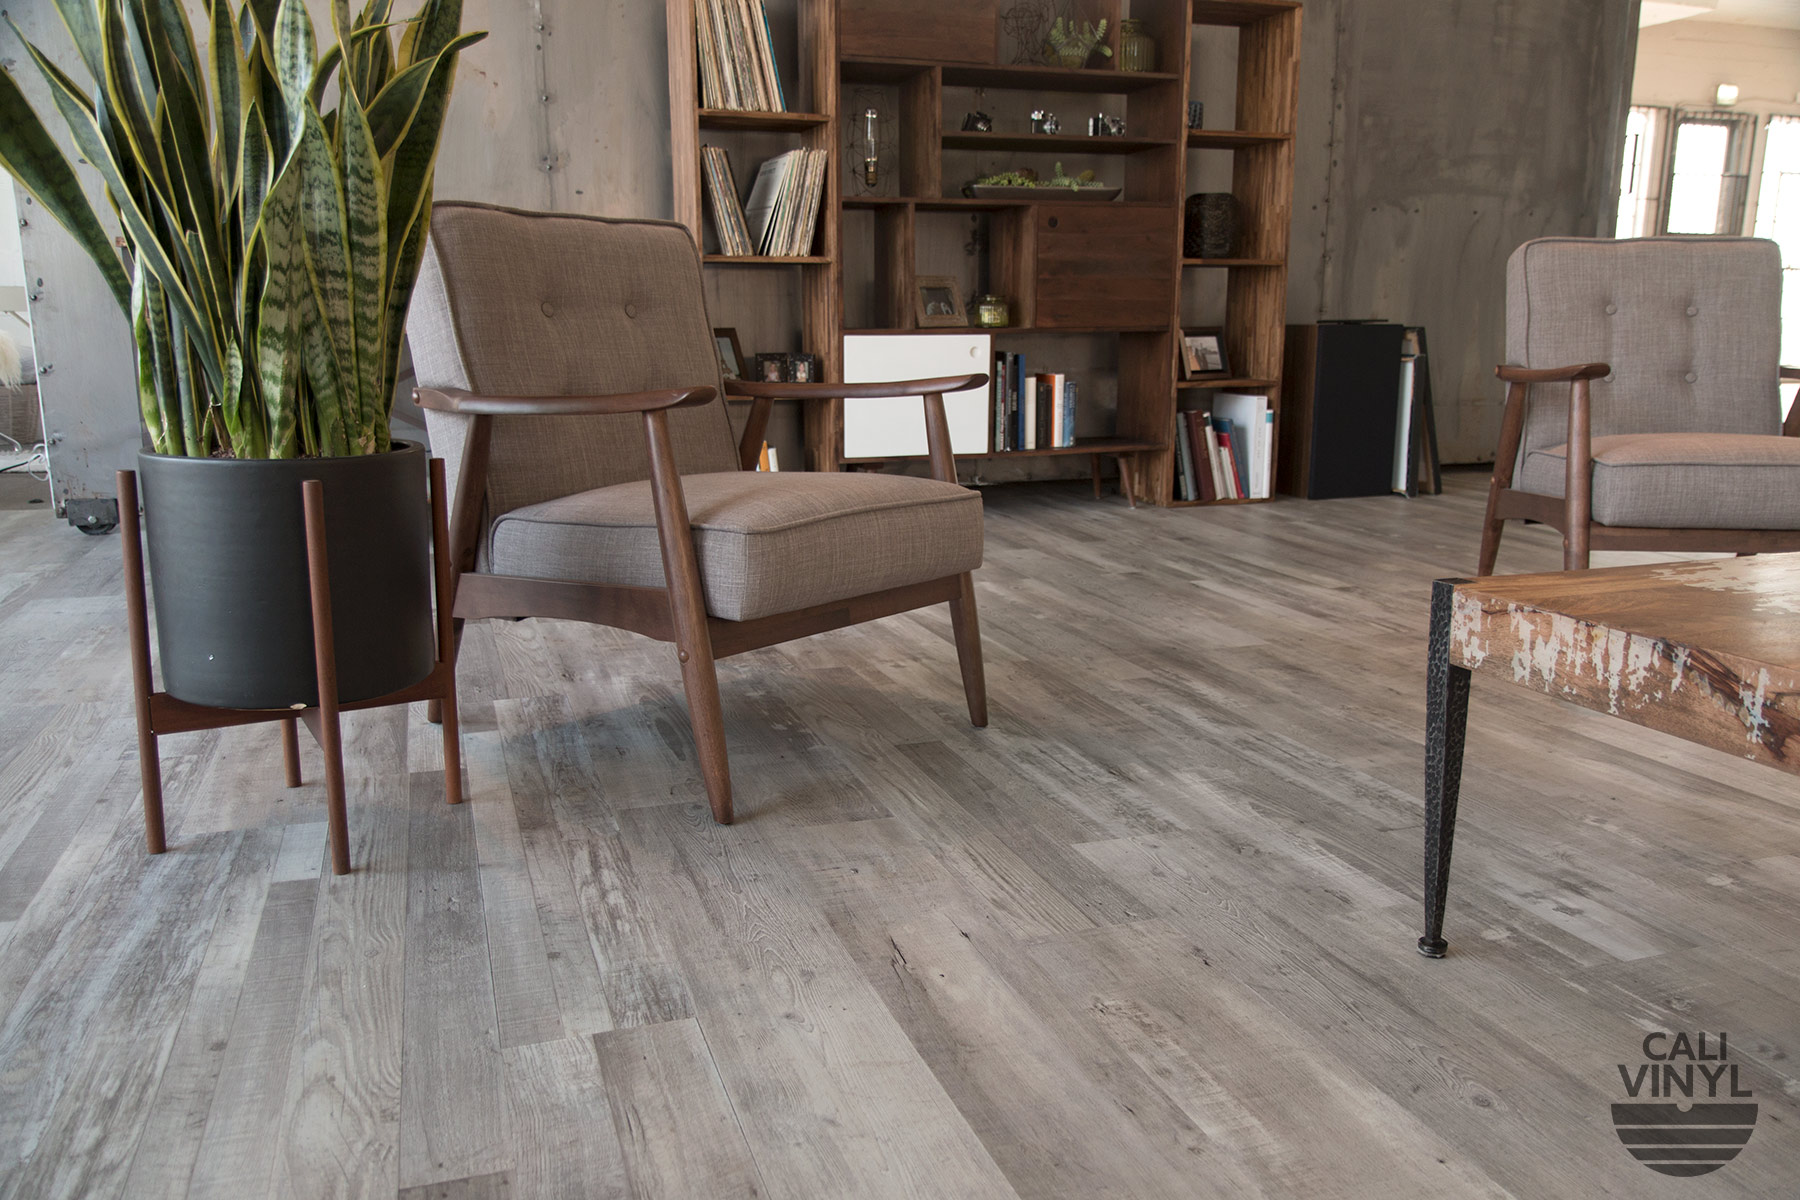 Options For Replacing Discontinued, How To Match Discontinued Laminate Flooring